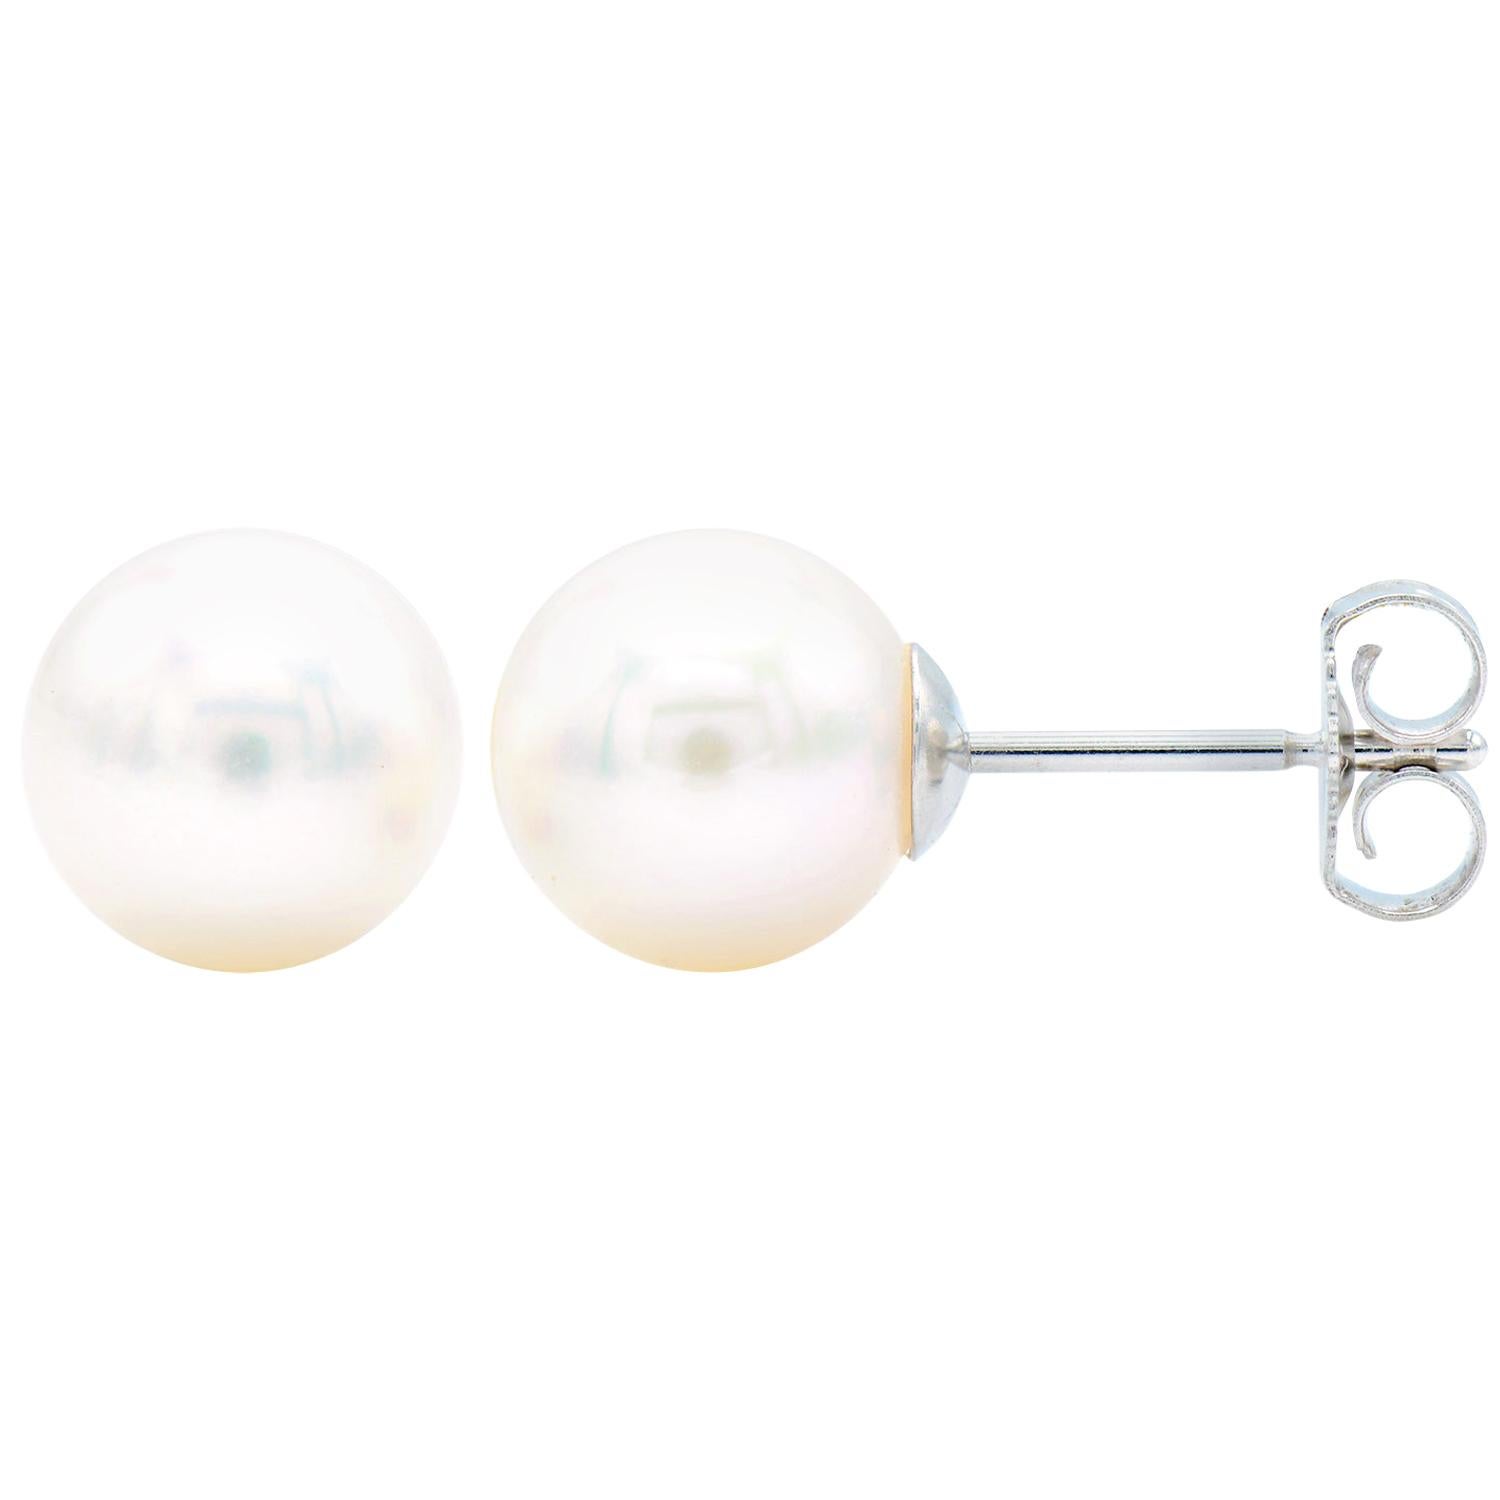 8-8.5mm Cultured Pearl Stud Earrings with 14 Karat White Gold Posts and Backs